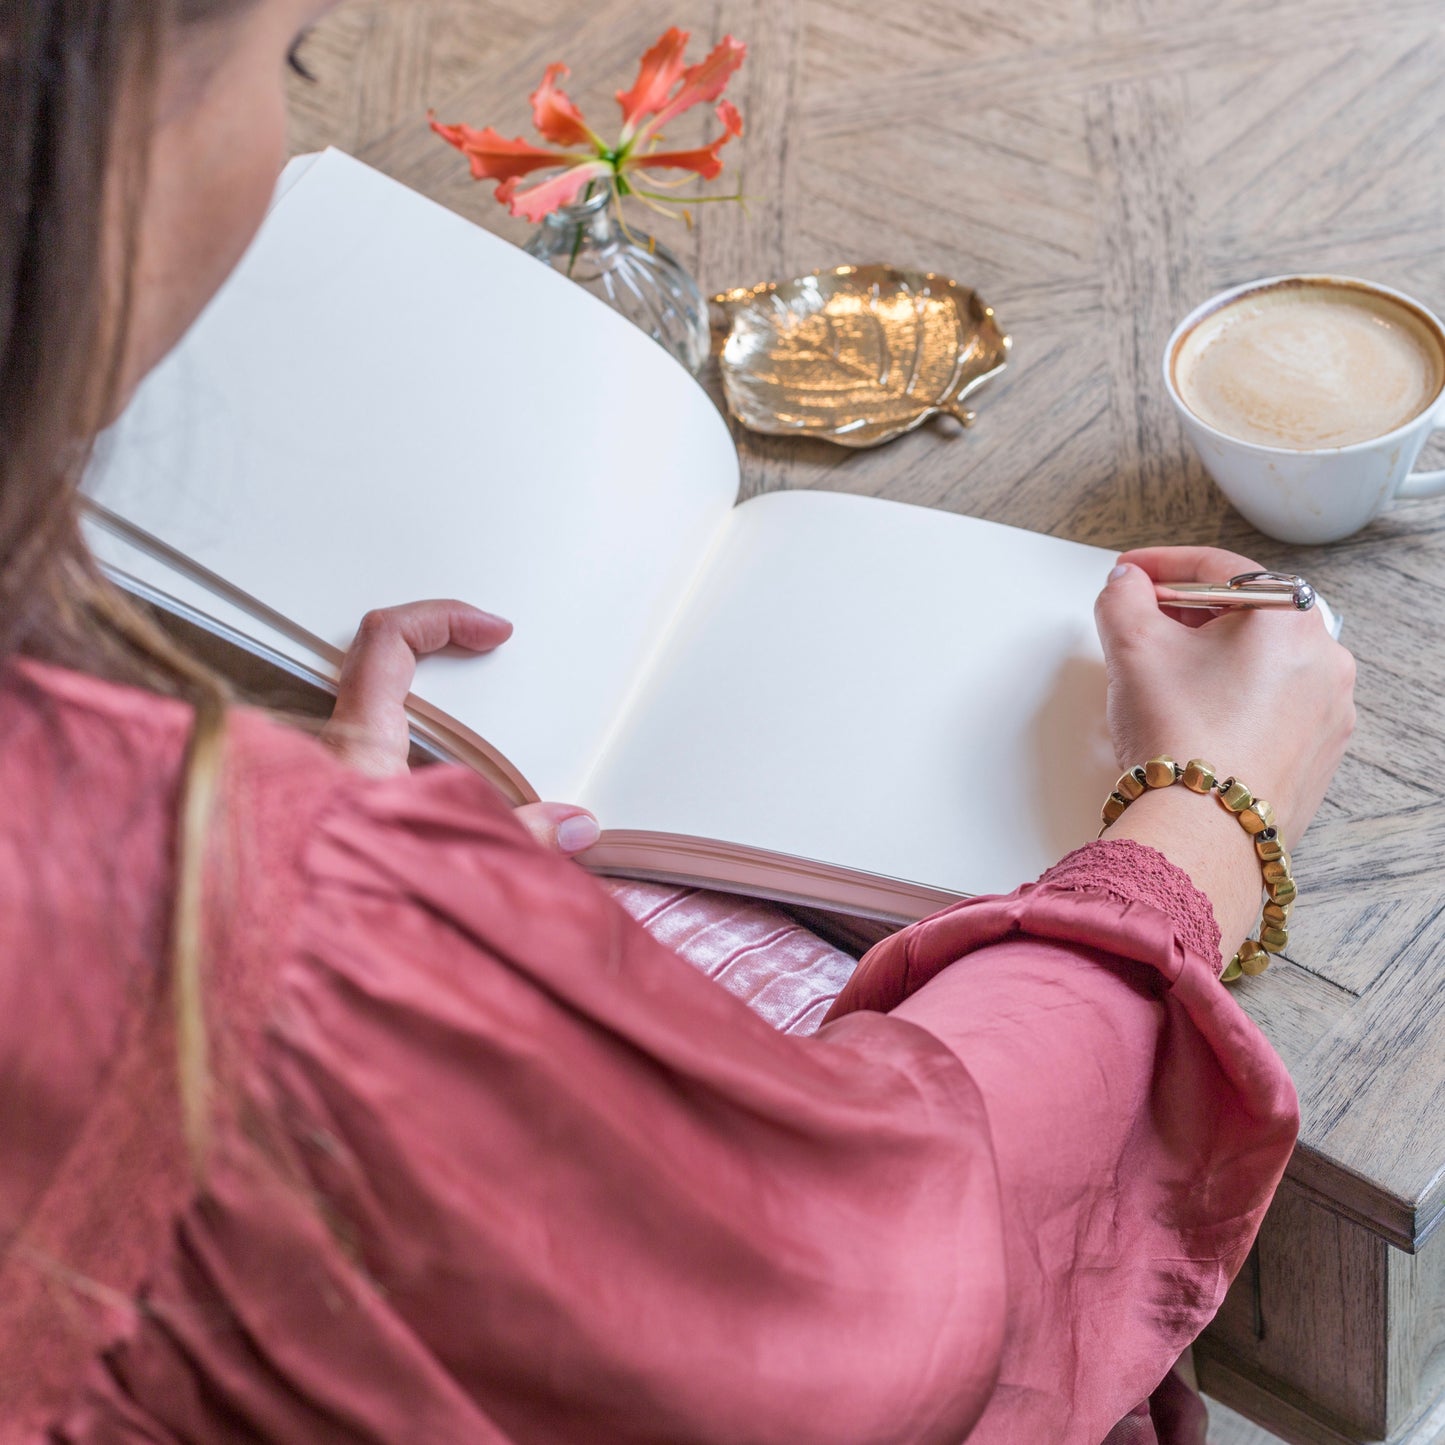 on a coffee table is a wedding guest book which is open, you can see the blank pages and woman is set to write a message in it. There is also a cup of coffee on the table 